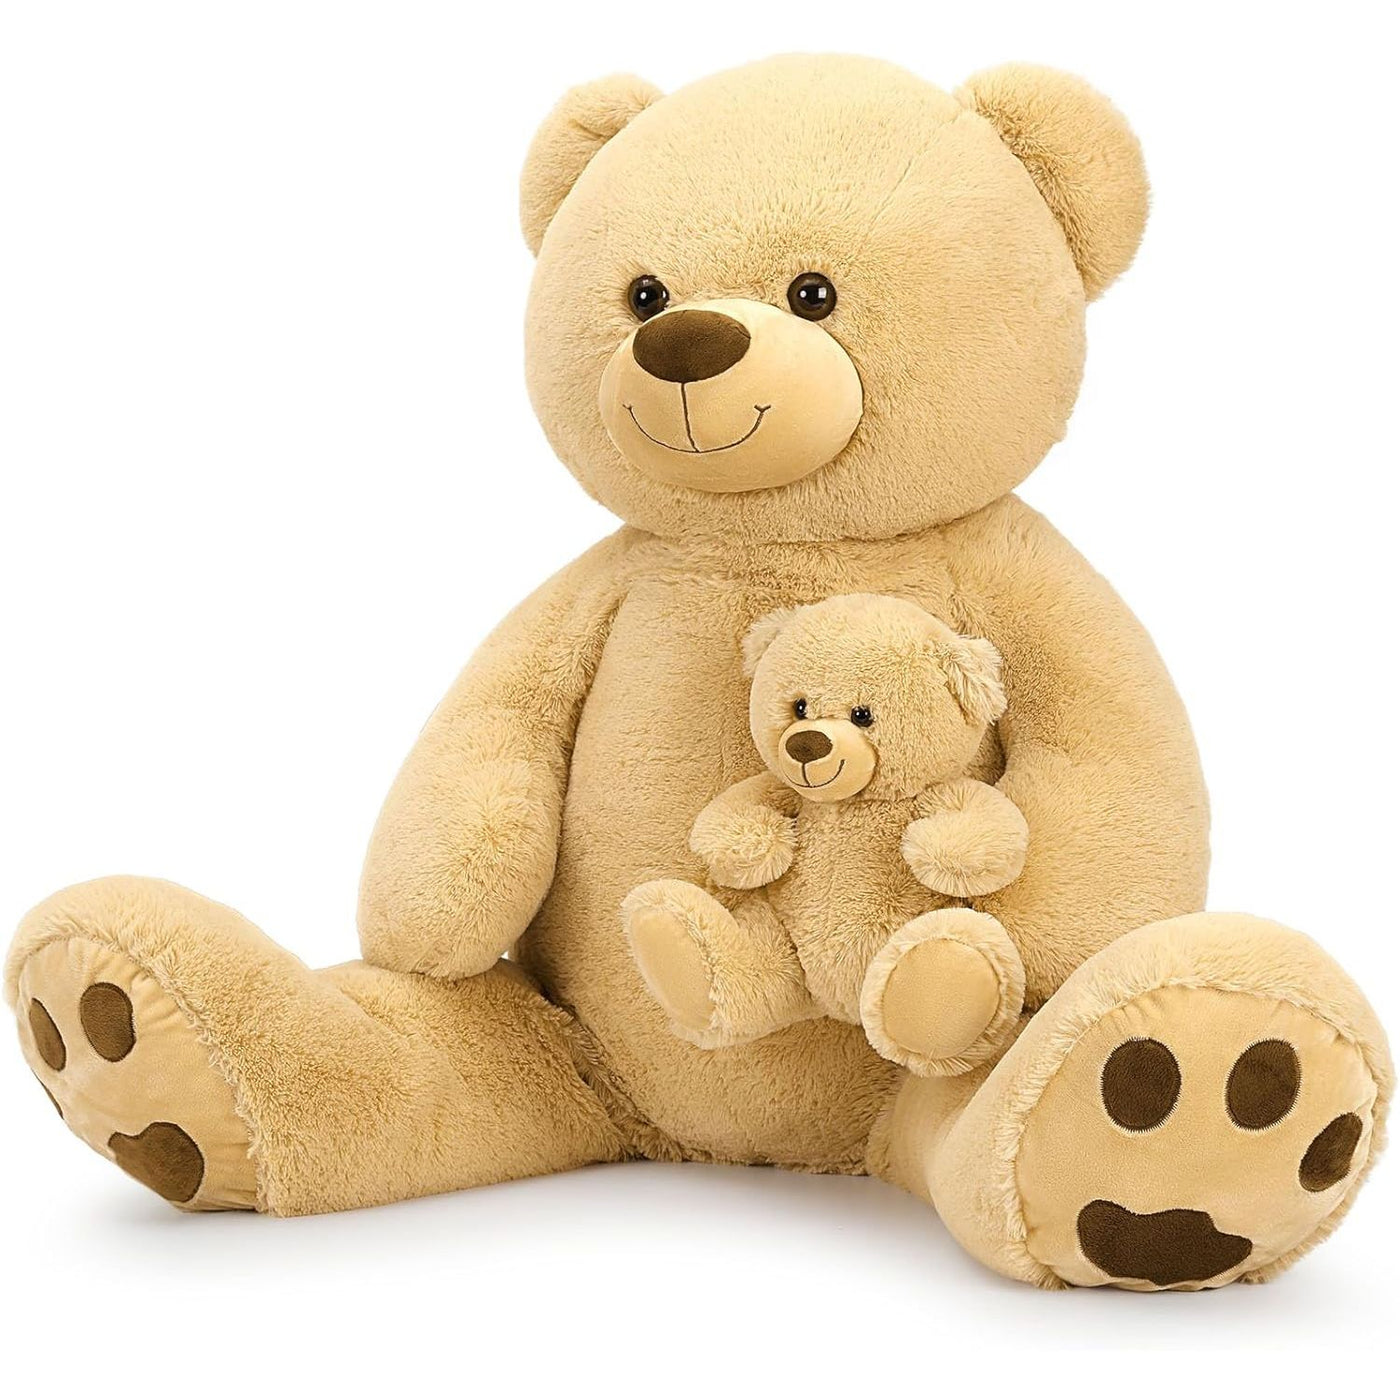 Giant Teddy Bear Stuffed Toy Set, Brown, 51 Inches